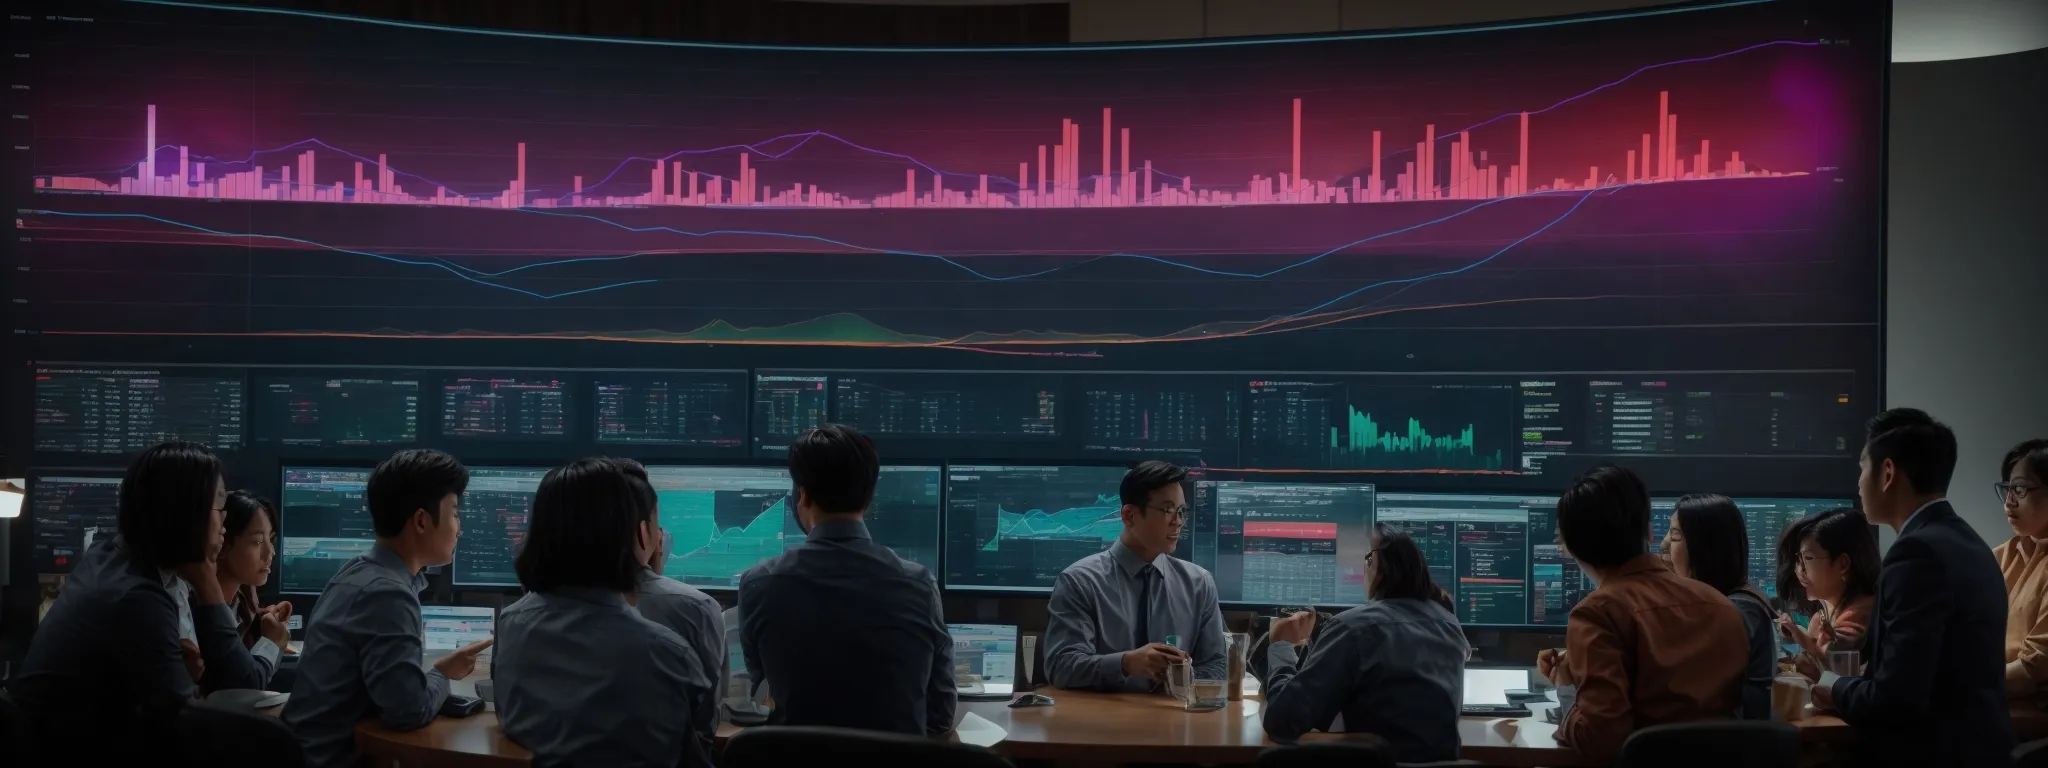 a group of professionals gathered around a large screen displaying colorful graphs and social media metrics.